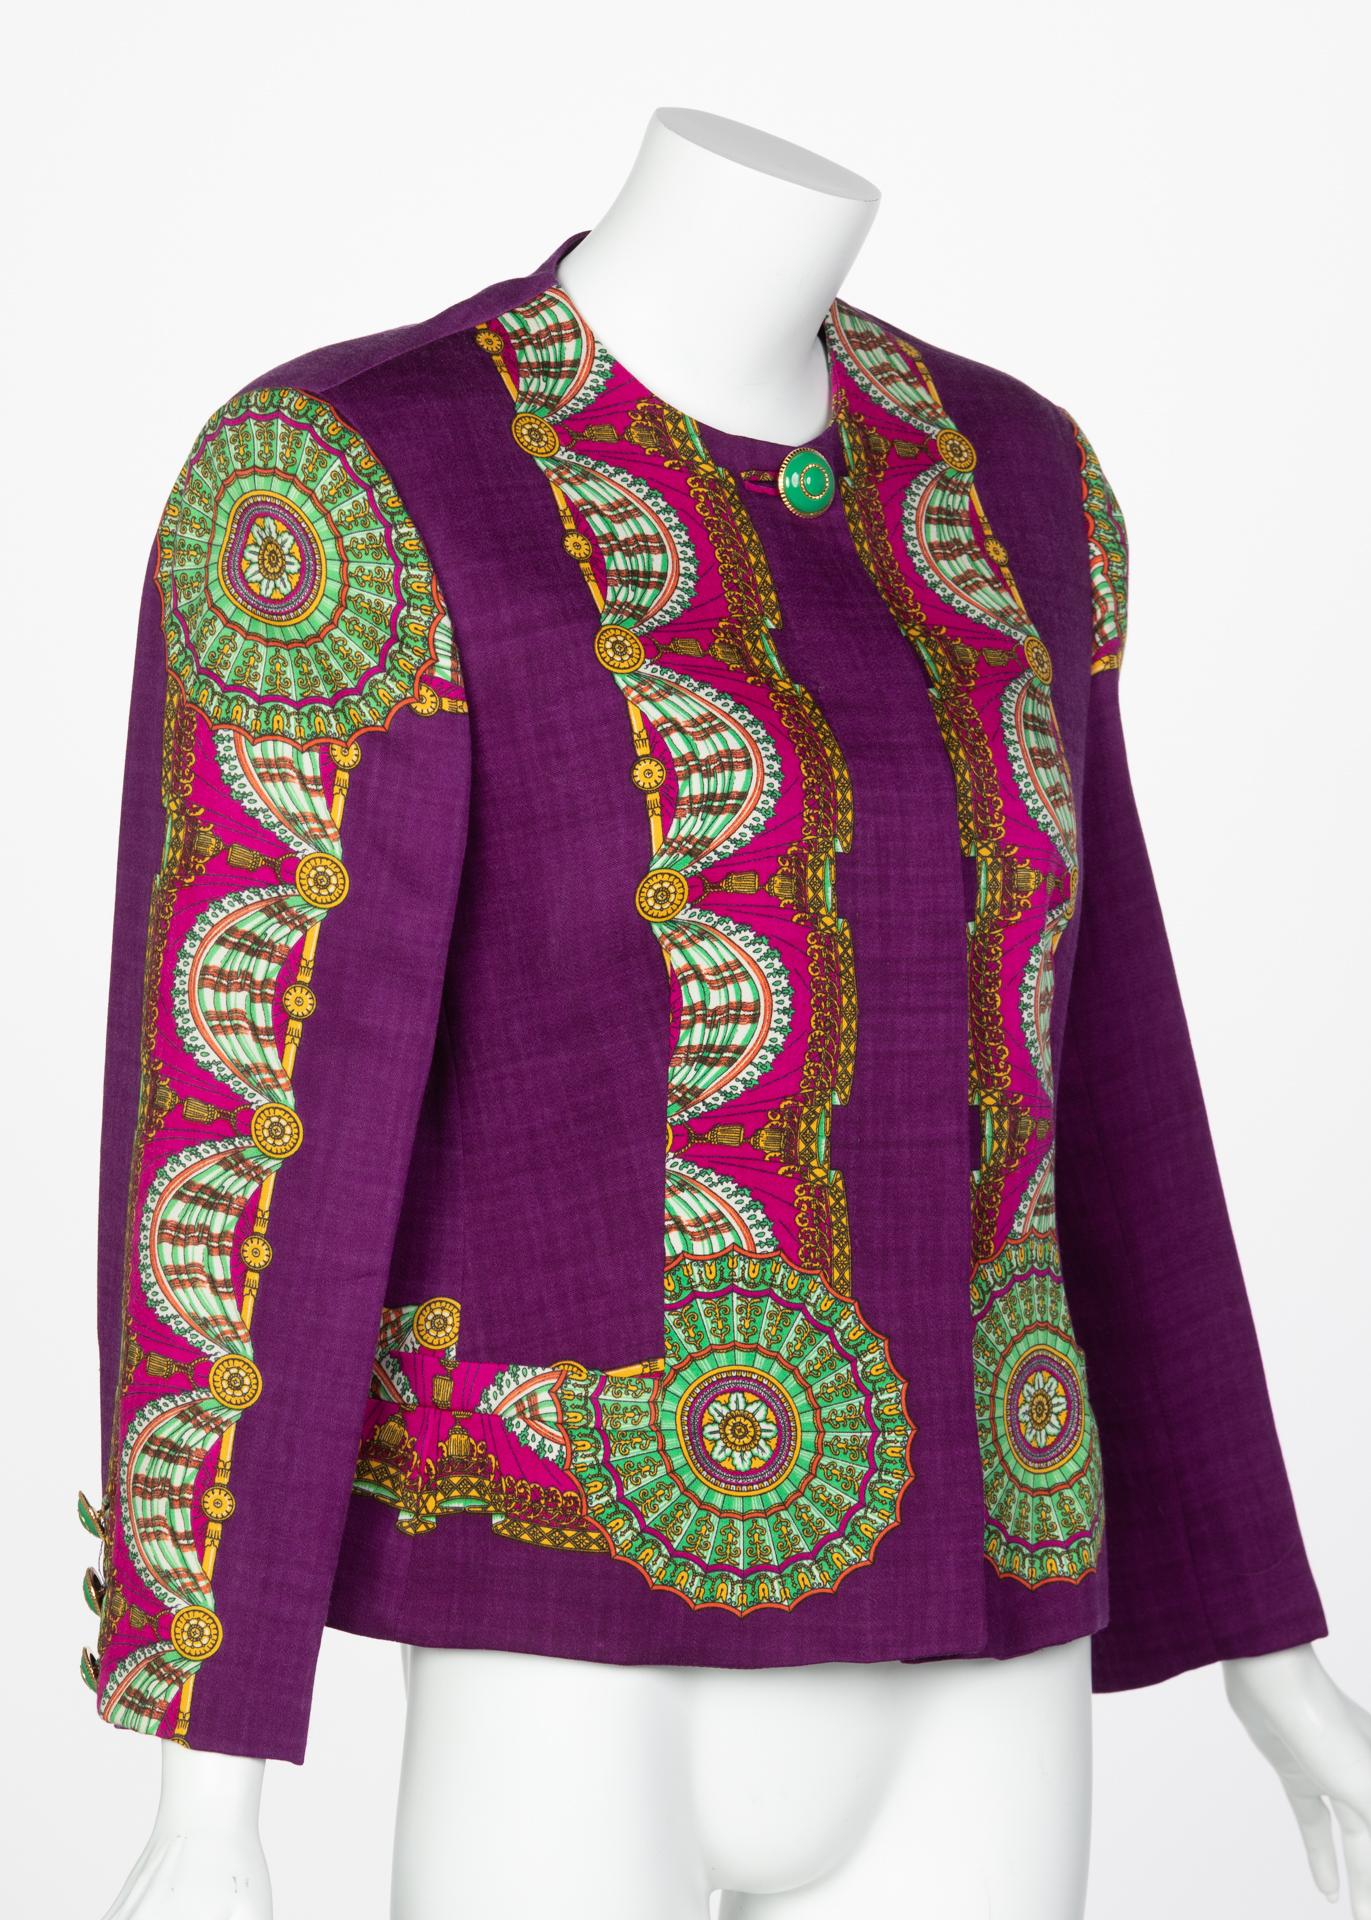 Gianni Versace Couture Purple Green Print Jacket, 1990s In Excellent Condition For Sale In Boca Raton, FL